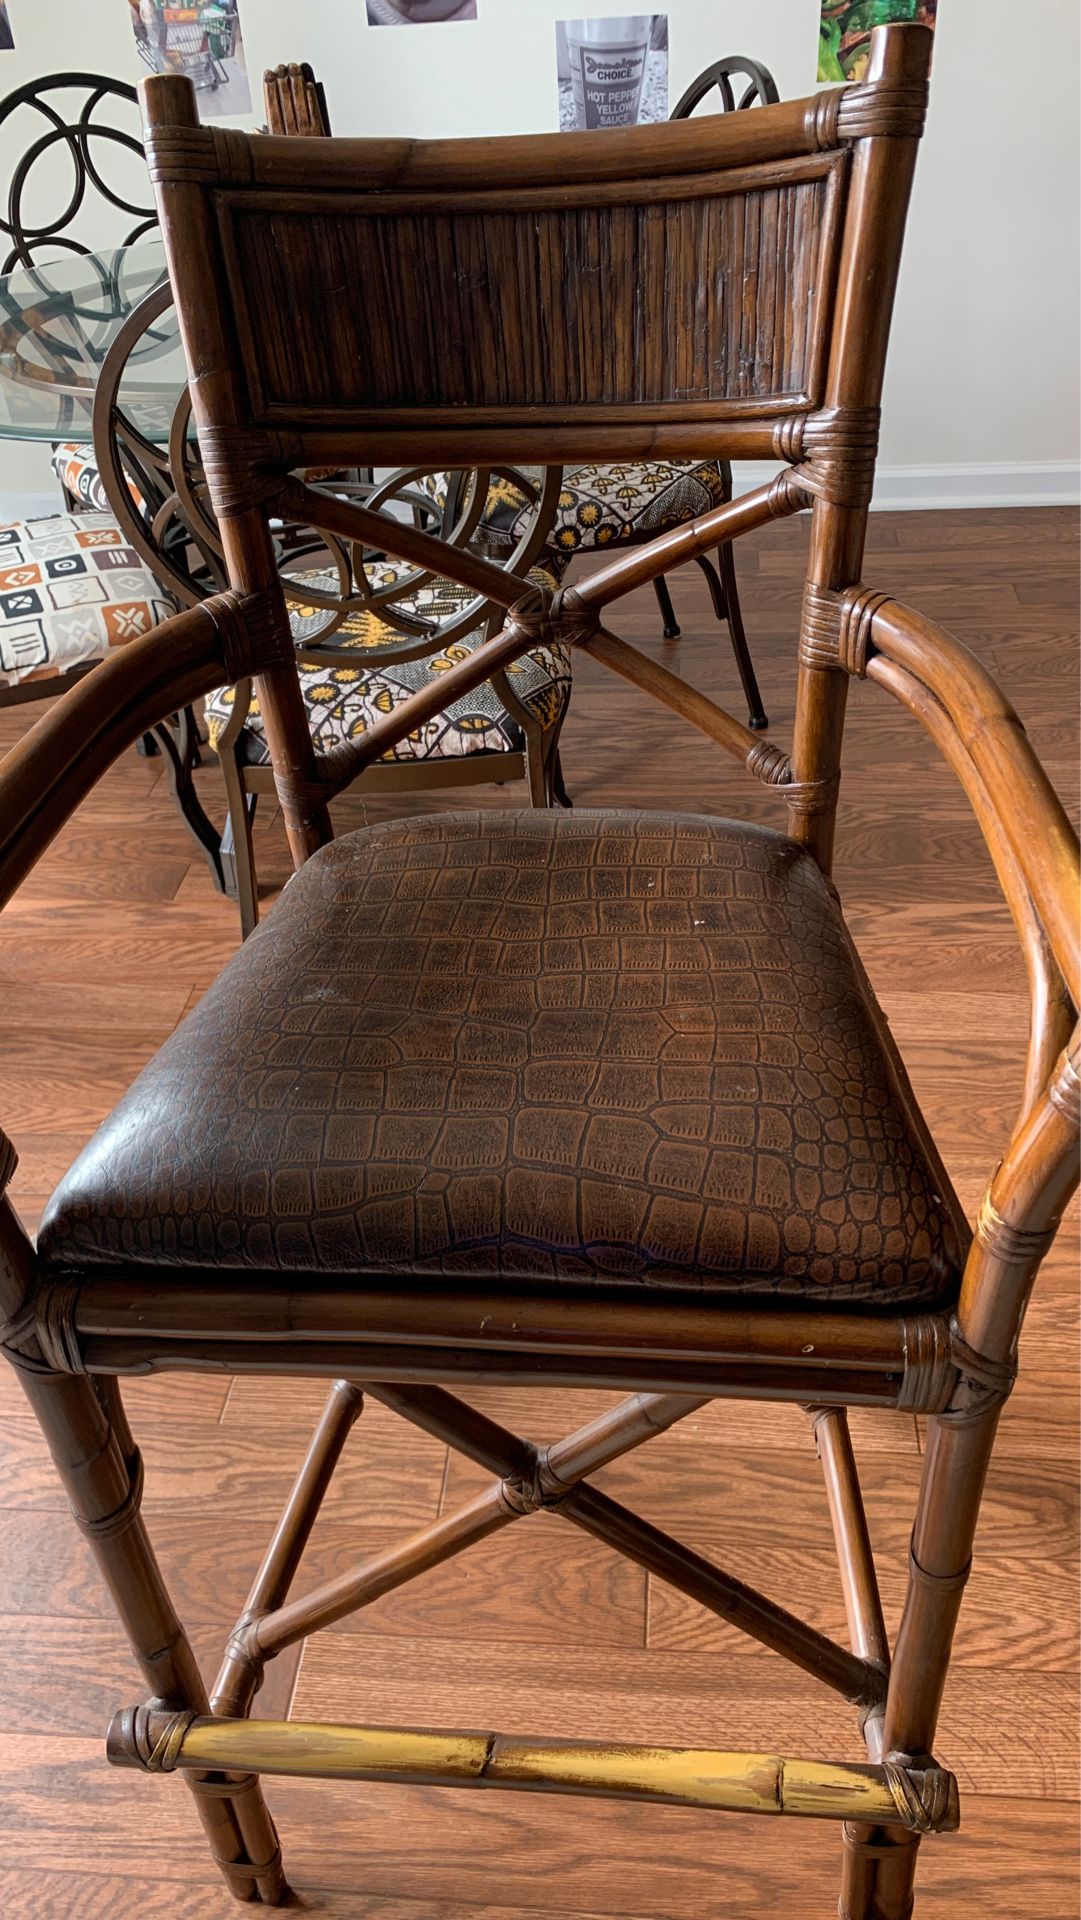 4 Bistro Chairs from Pier One Imports